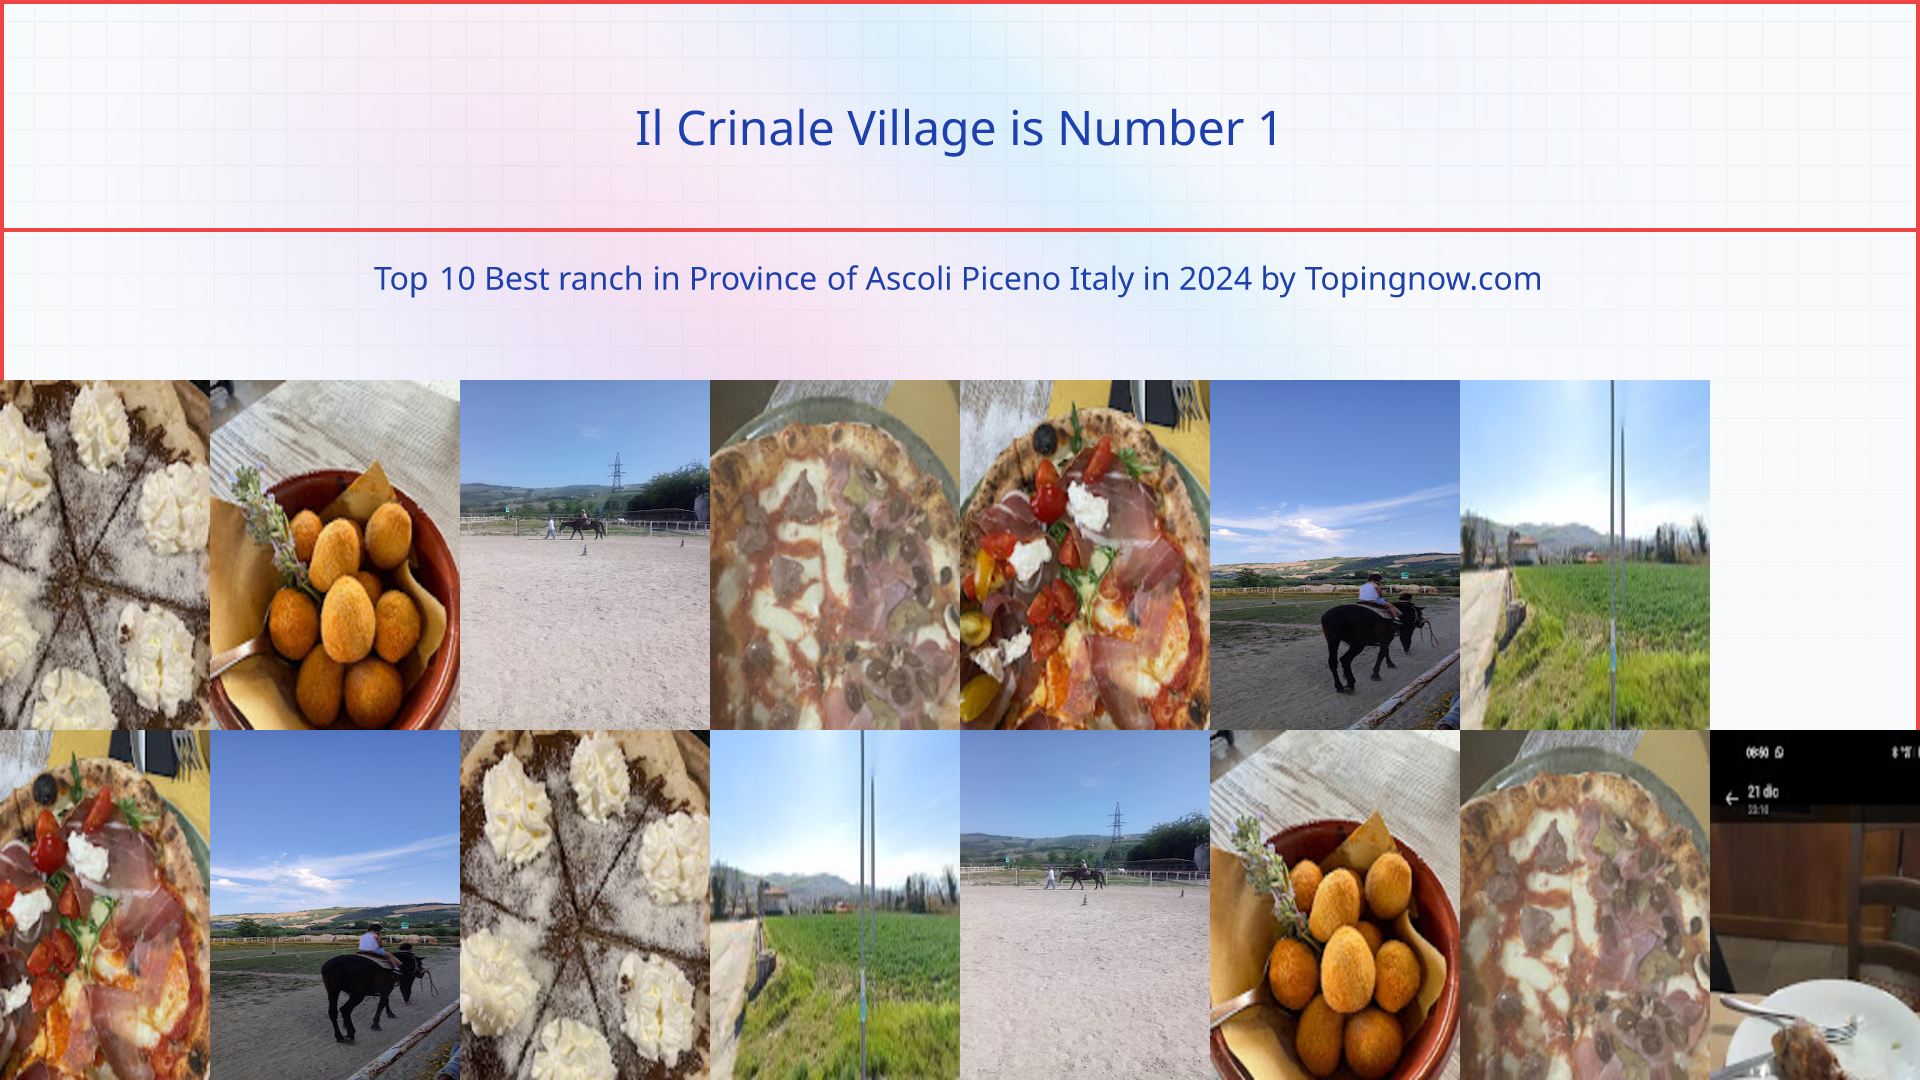 Il Crinale Village: Top 10 Best ranch in Province of Ascoli Piceno Italy in 2024